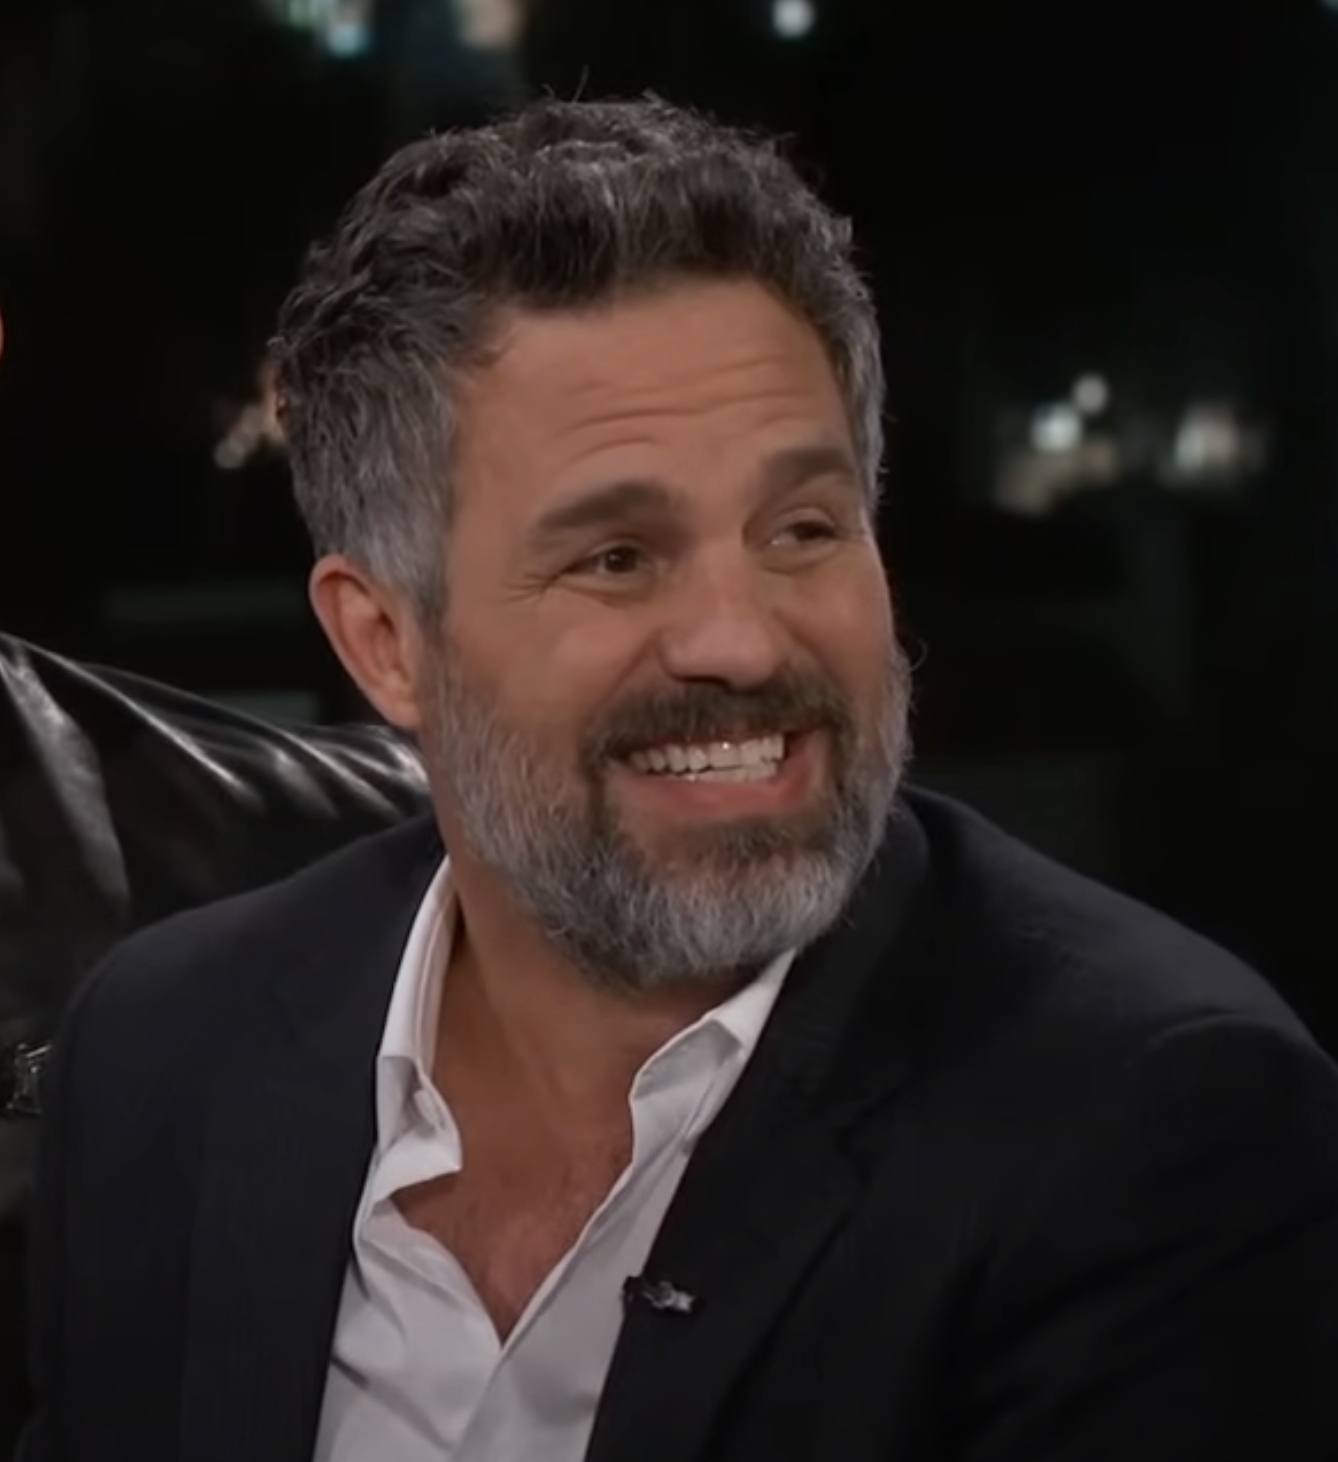 Mark Ruffalo in a suit, white shirt, no tie, smiling in an interview setting